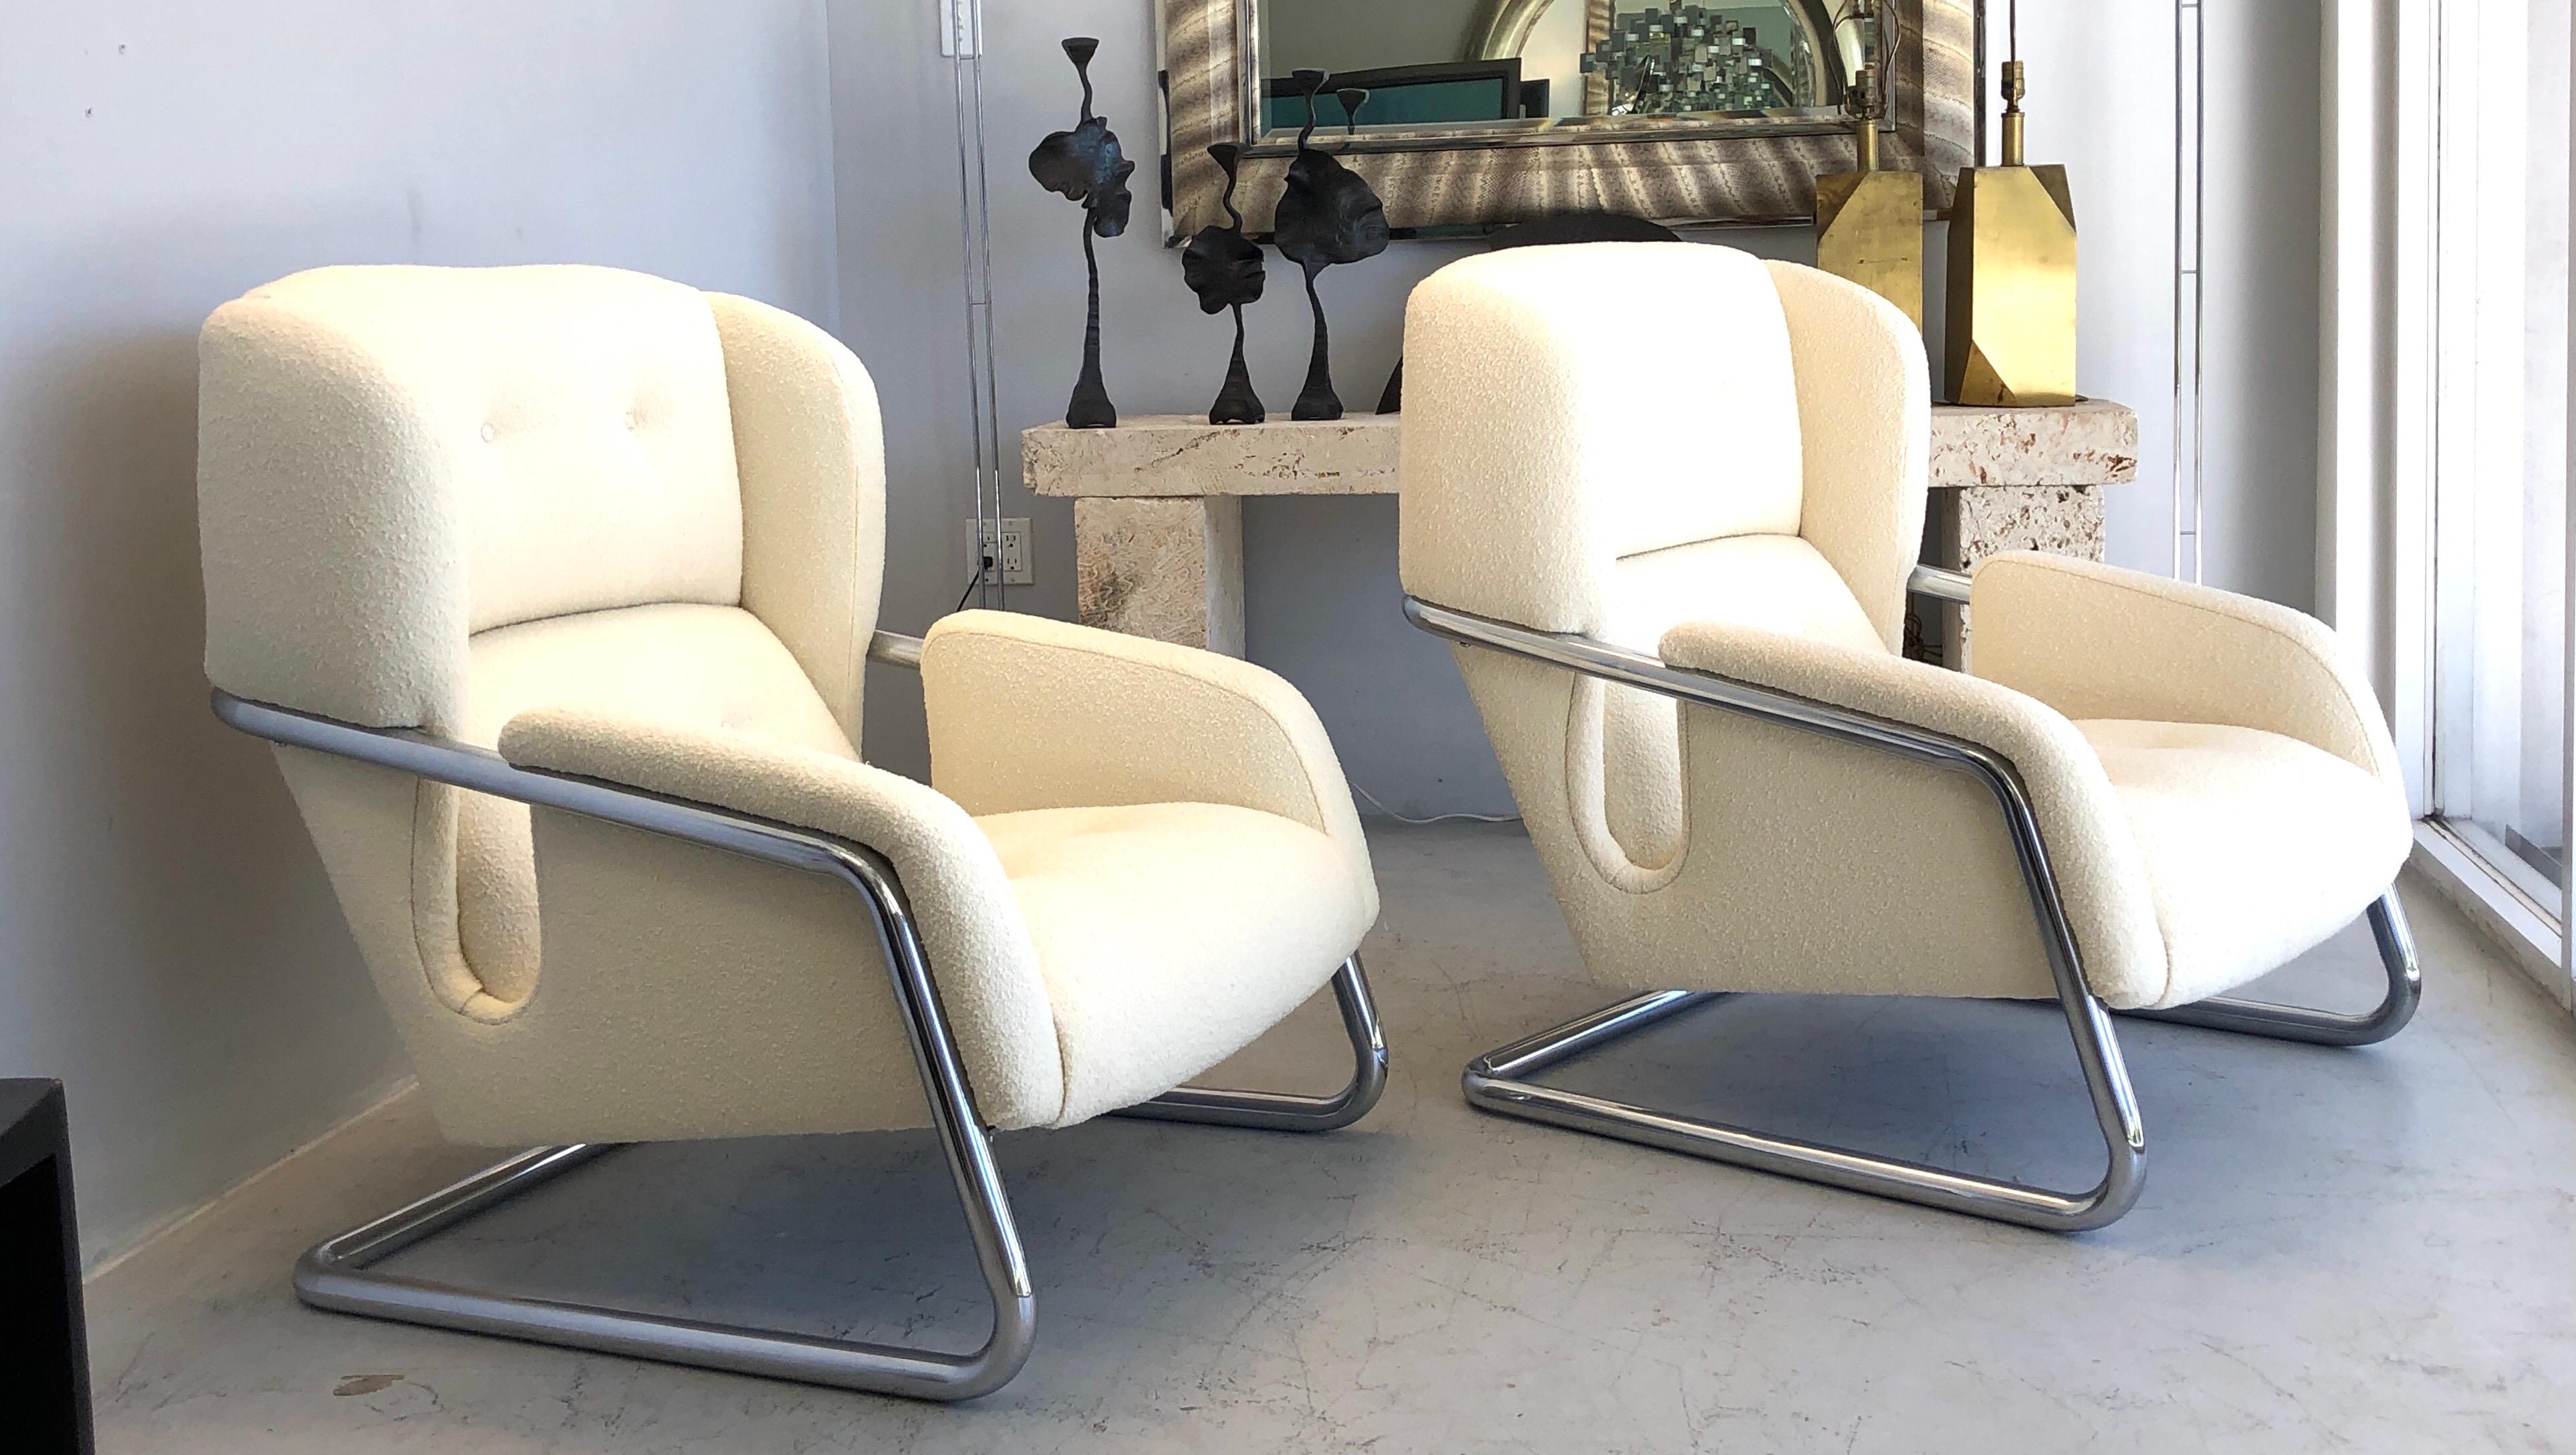 A pair of extraordinary 1970s lounge chairs. Very sophisticated cantilevered design. New upholstery.